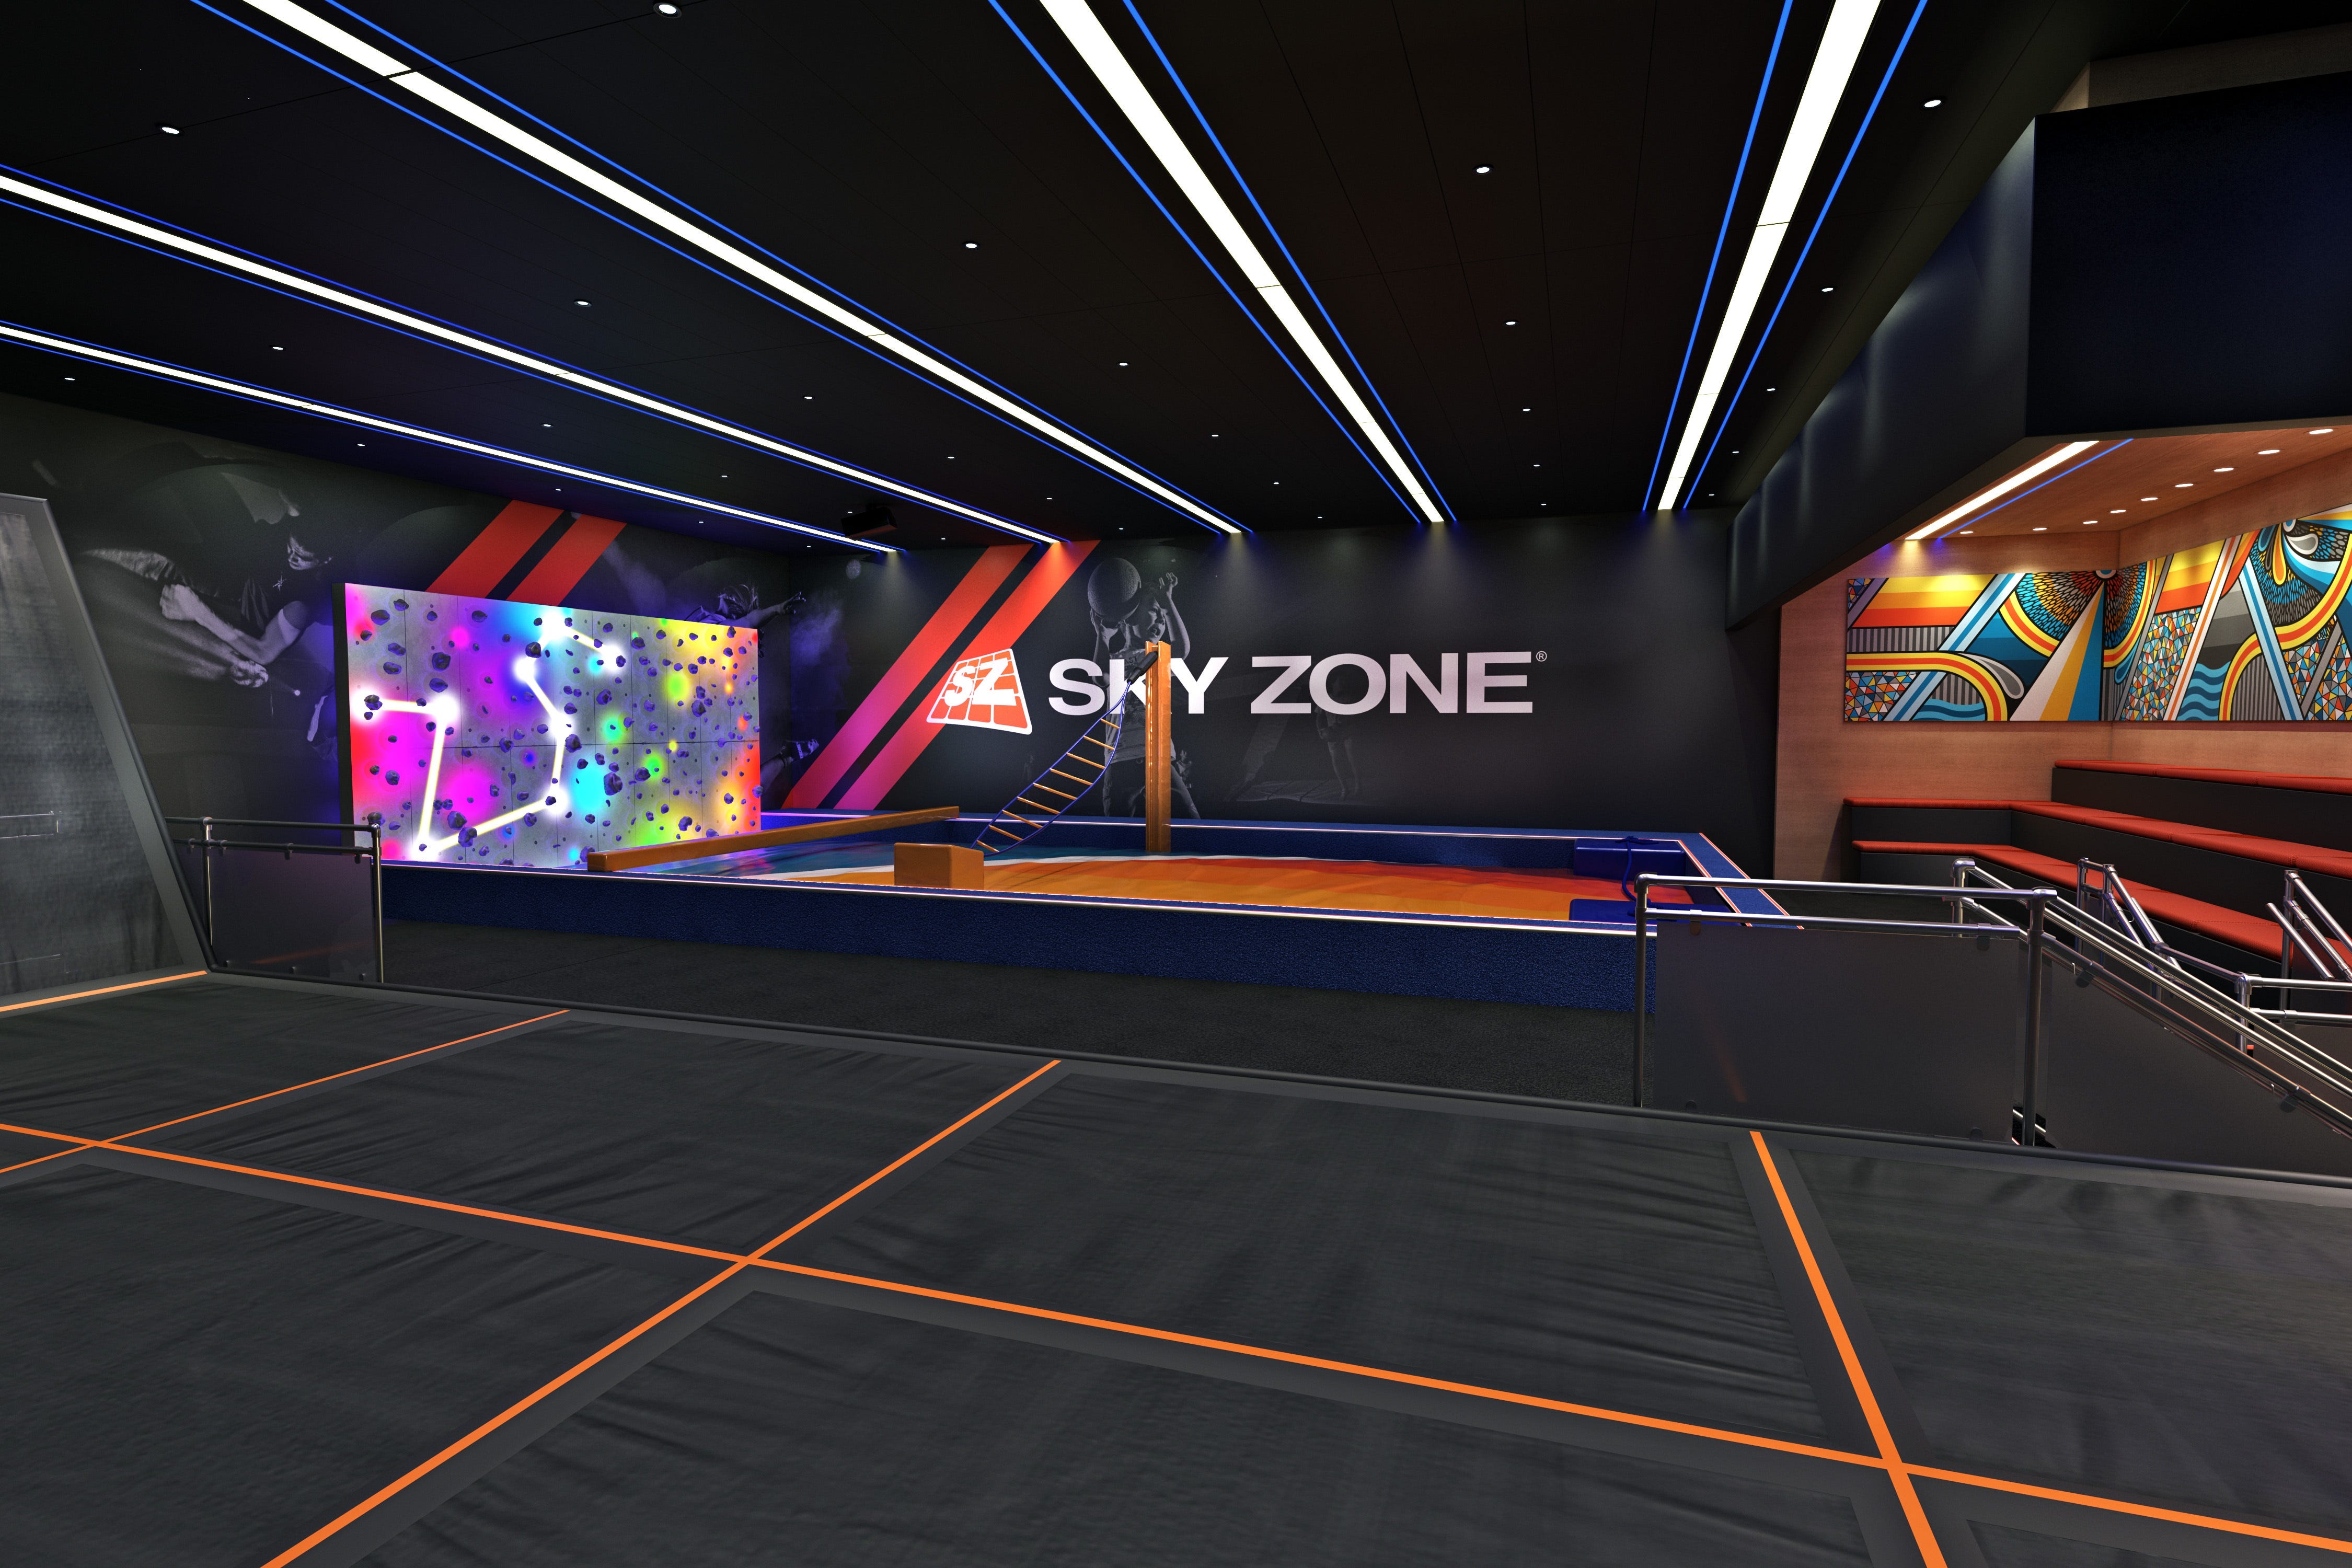 Sky Zone Trampoline Park at Sea Is Opening on Carnival Cruises